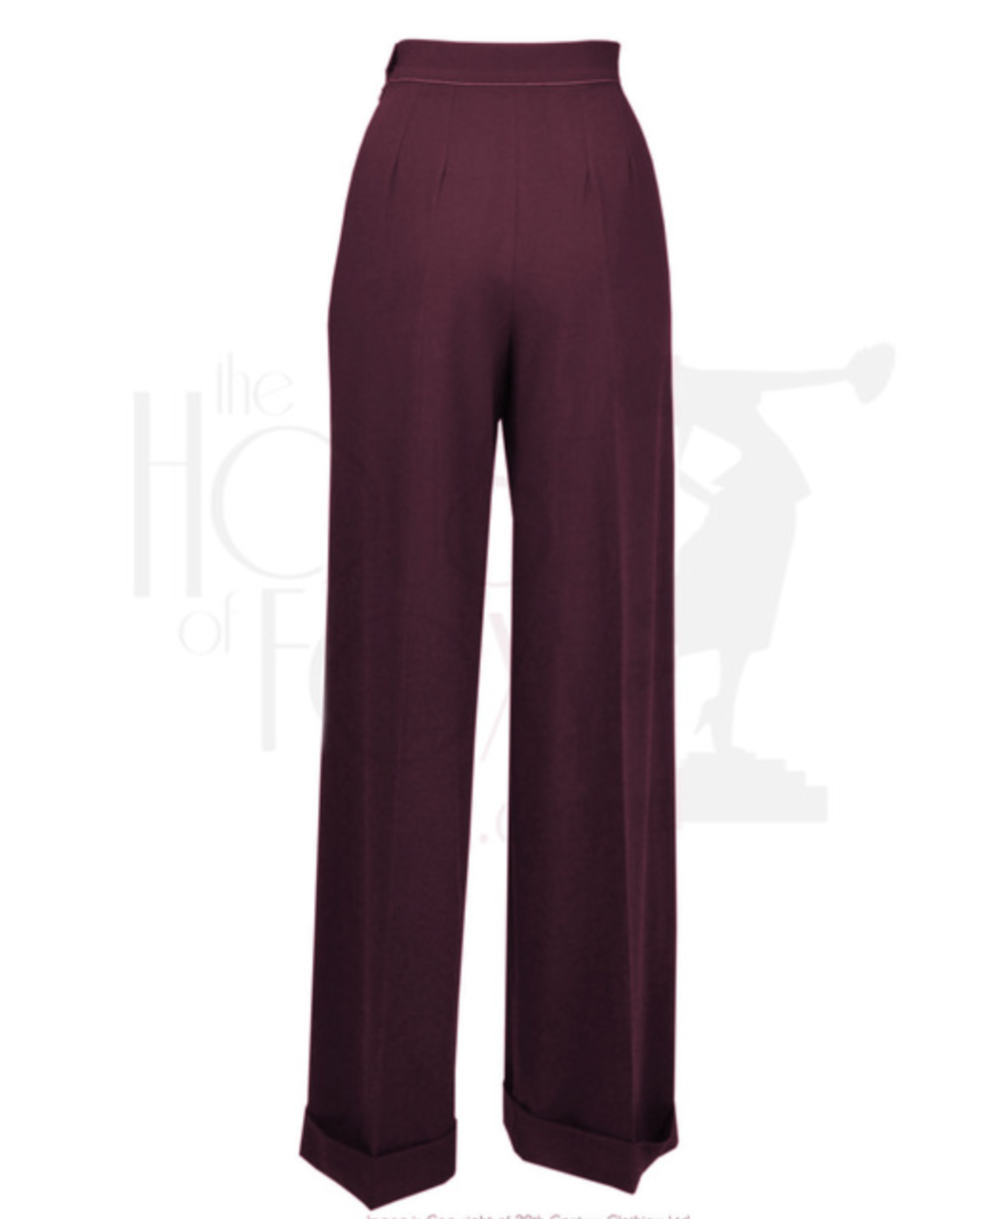 The House Of Foxy - Available now! Our eagerly awaited Pinstripe Cashmere  Blend Hepburn Trousers! Sorry you had to wait so long for these - we had to  make some changes to